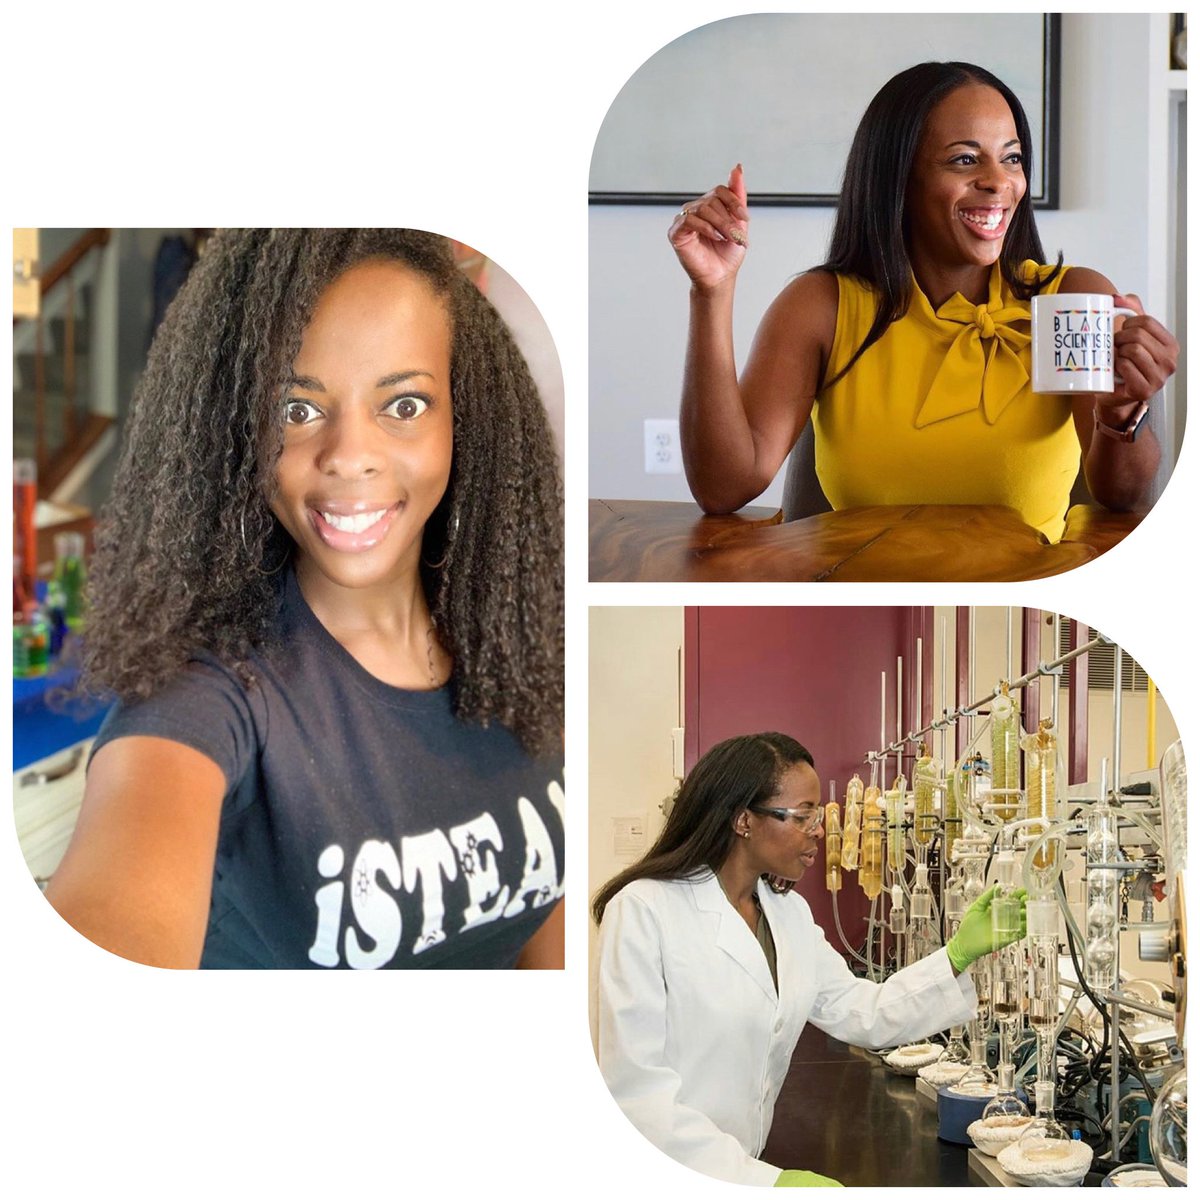 Hey #BlackinChem fam 👋🏾! My name is Jeanita/Dr. J. I wear many hats in the STEM ecosystem:
•Leadership coach 💻
•Analytical Chemist 👩🏾‍🔬 
•Chemistry Professor 👩🏾‍🏫 
•STEM Outreach Enthusiast🧪 

Looking forward to networking this week!  
 #BlackinChemRollCall #BlackinAnalytical